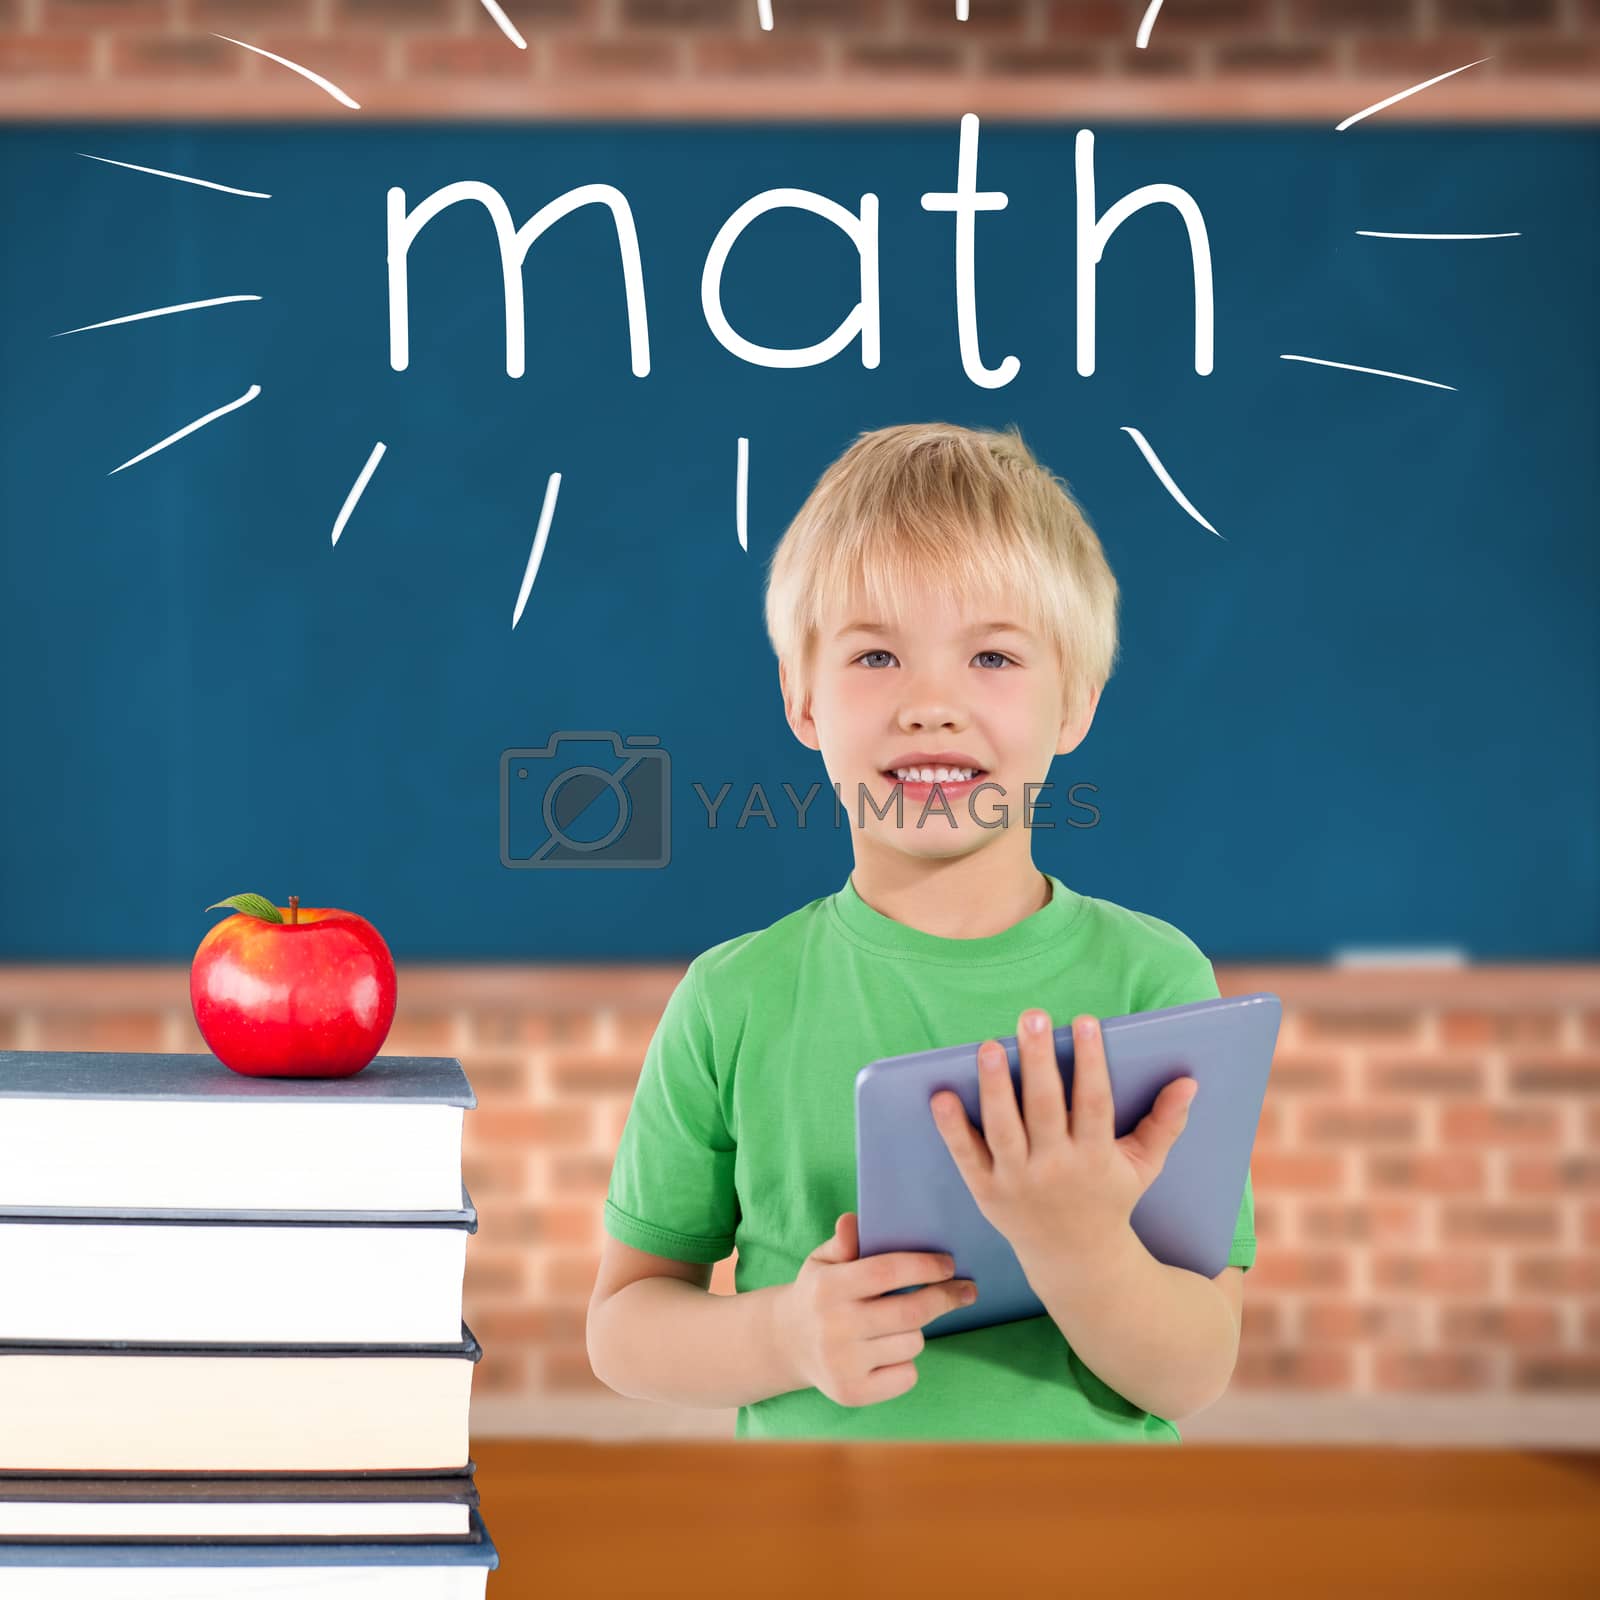 Royalty free image of Math against red apple on pile of books in classroom by Wavebreakmedia